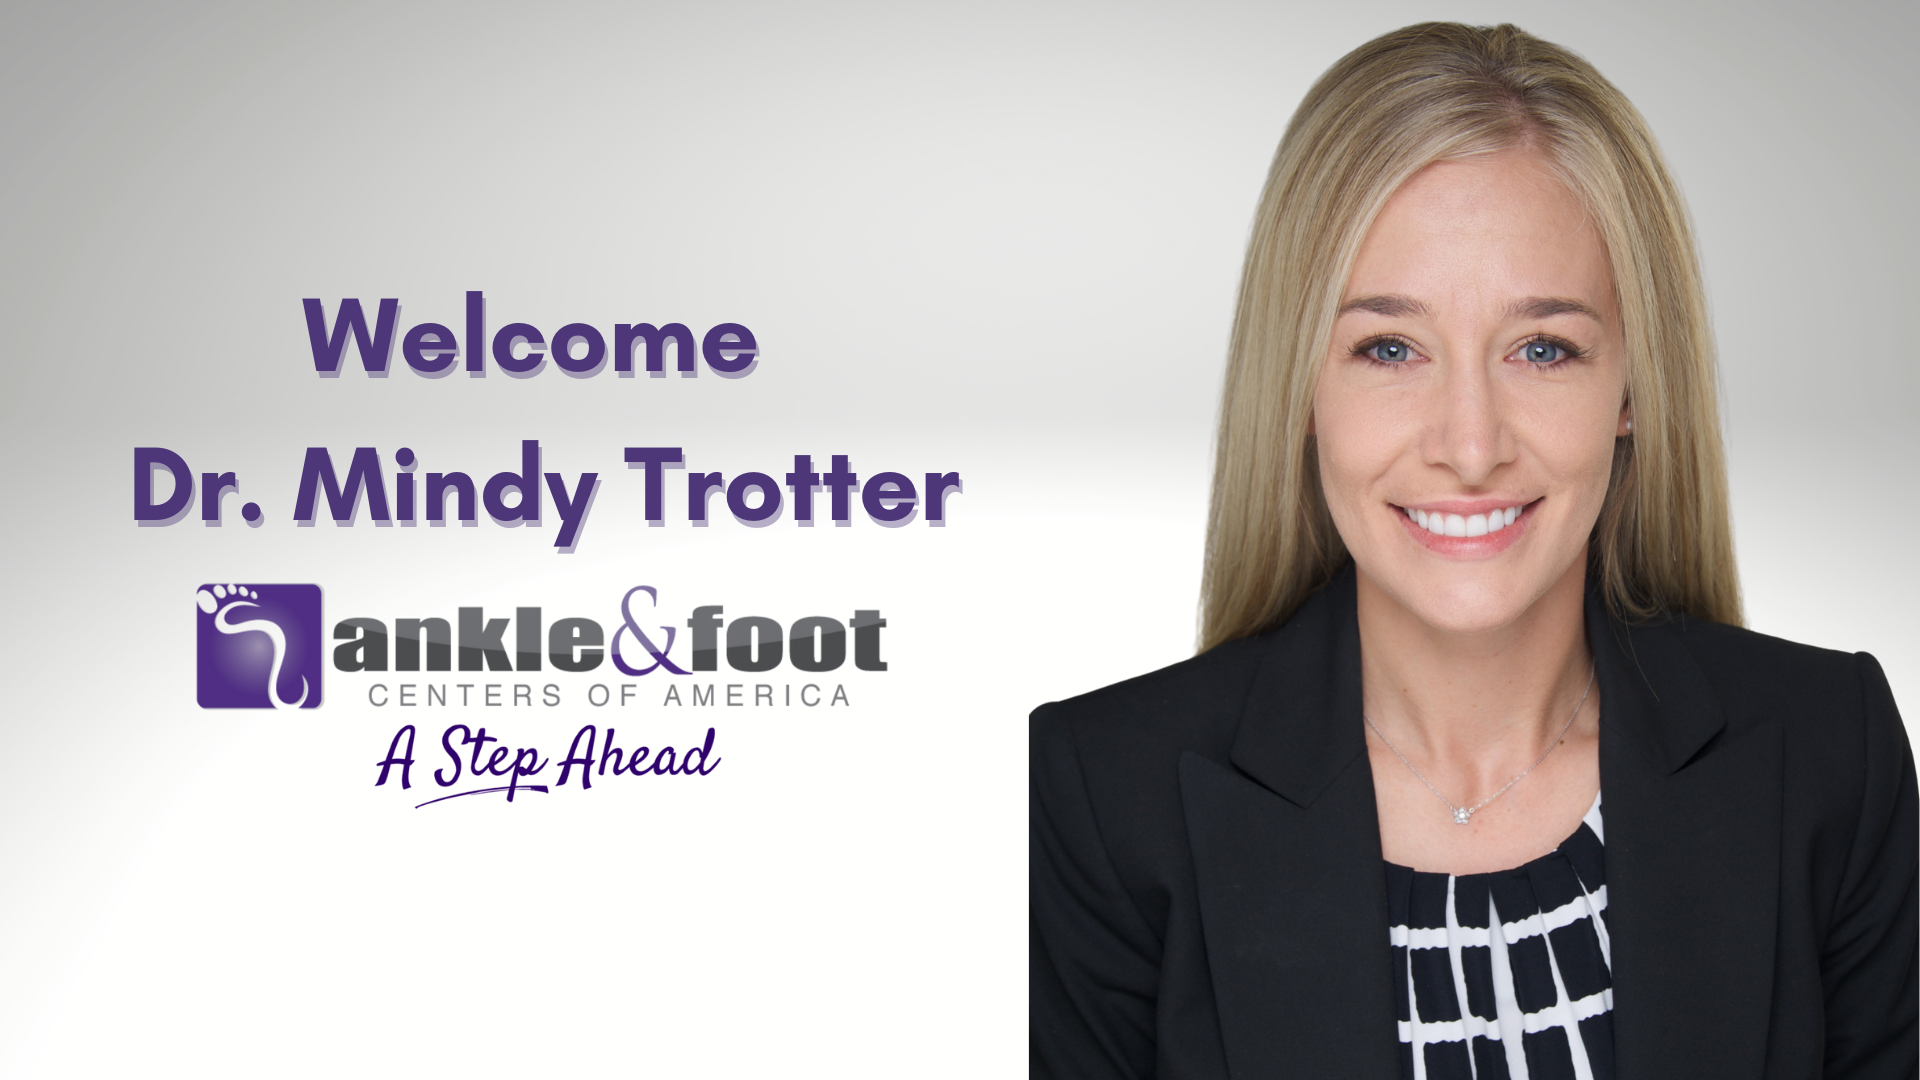 Ankle & Foot Centers of Georgia is thrilled to welcome Dr. Mindy Trotter to the Ankle & Foot Centers Team!